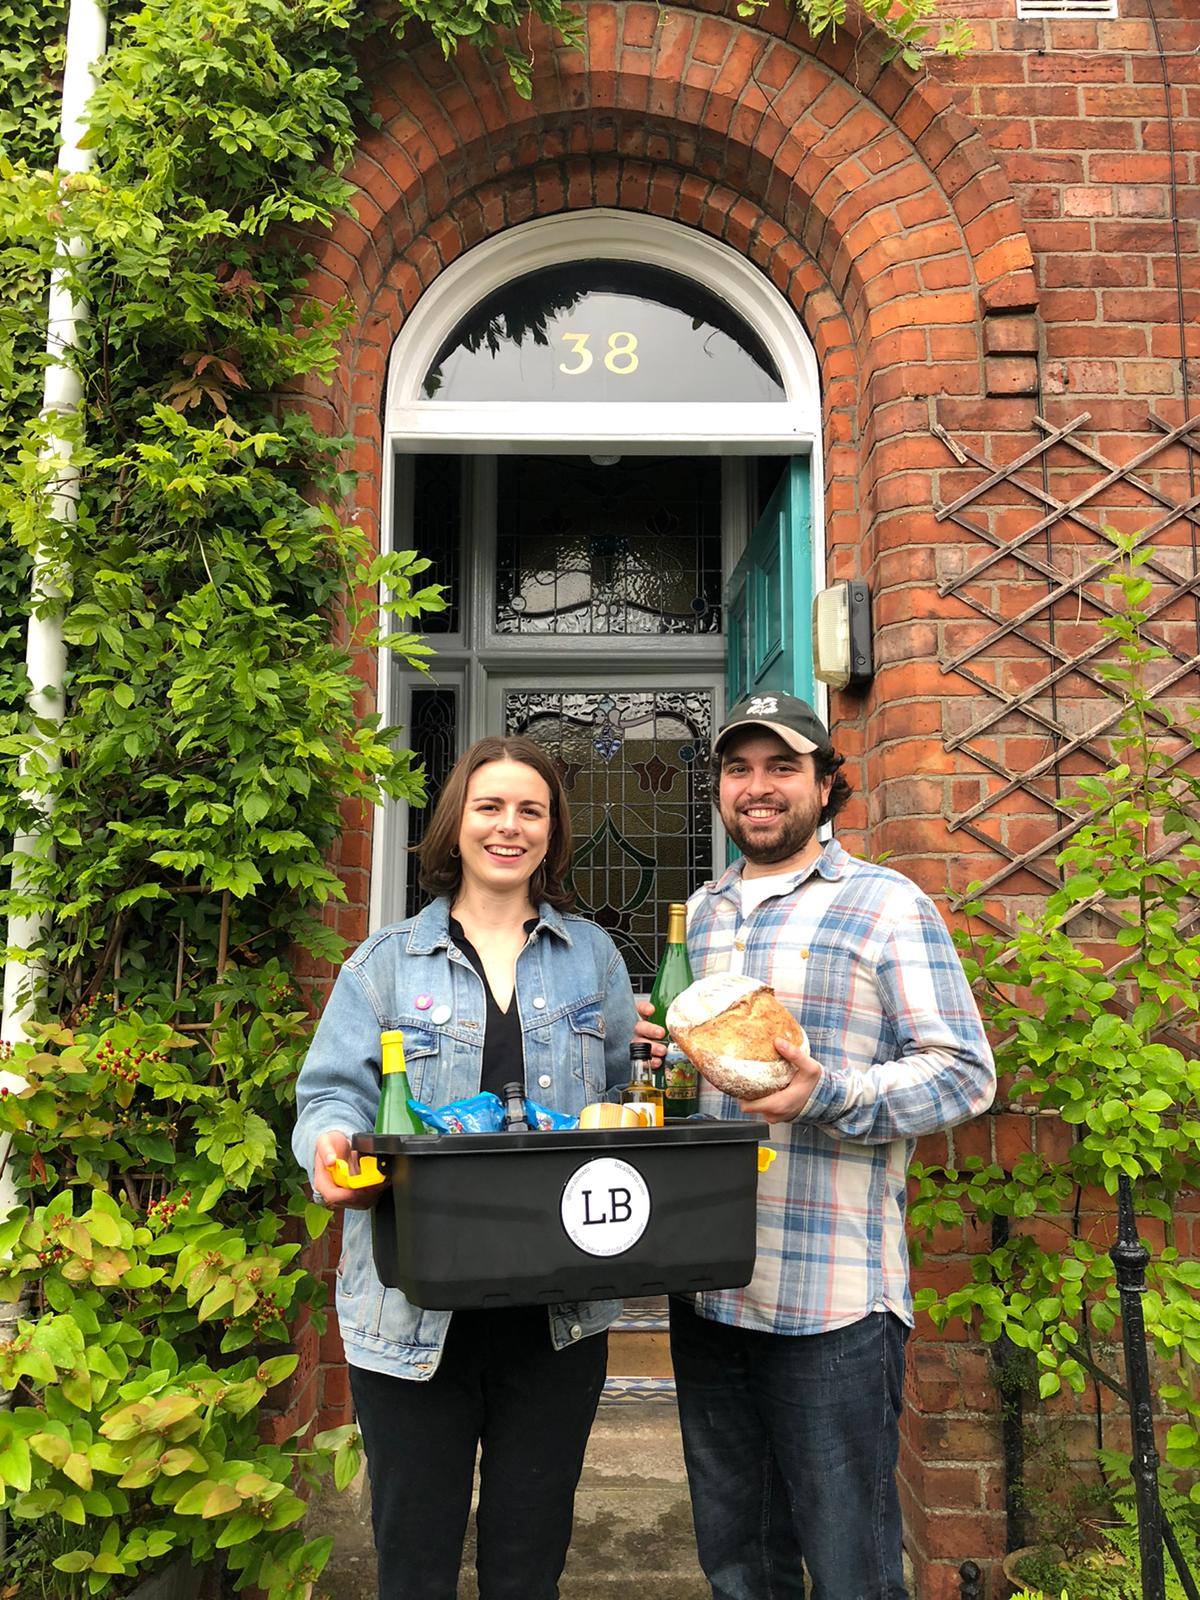 Belfast couple launch local food delivery service during lockdown